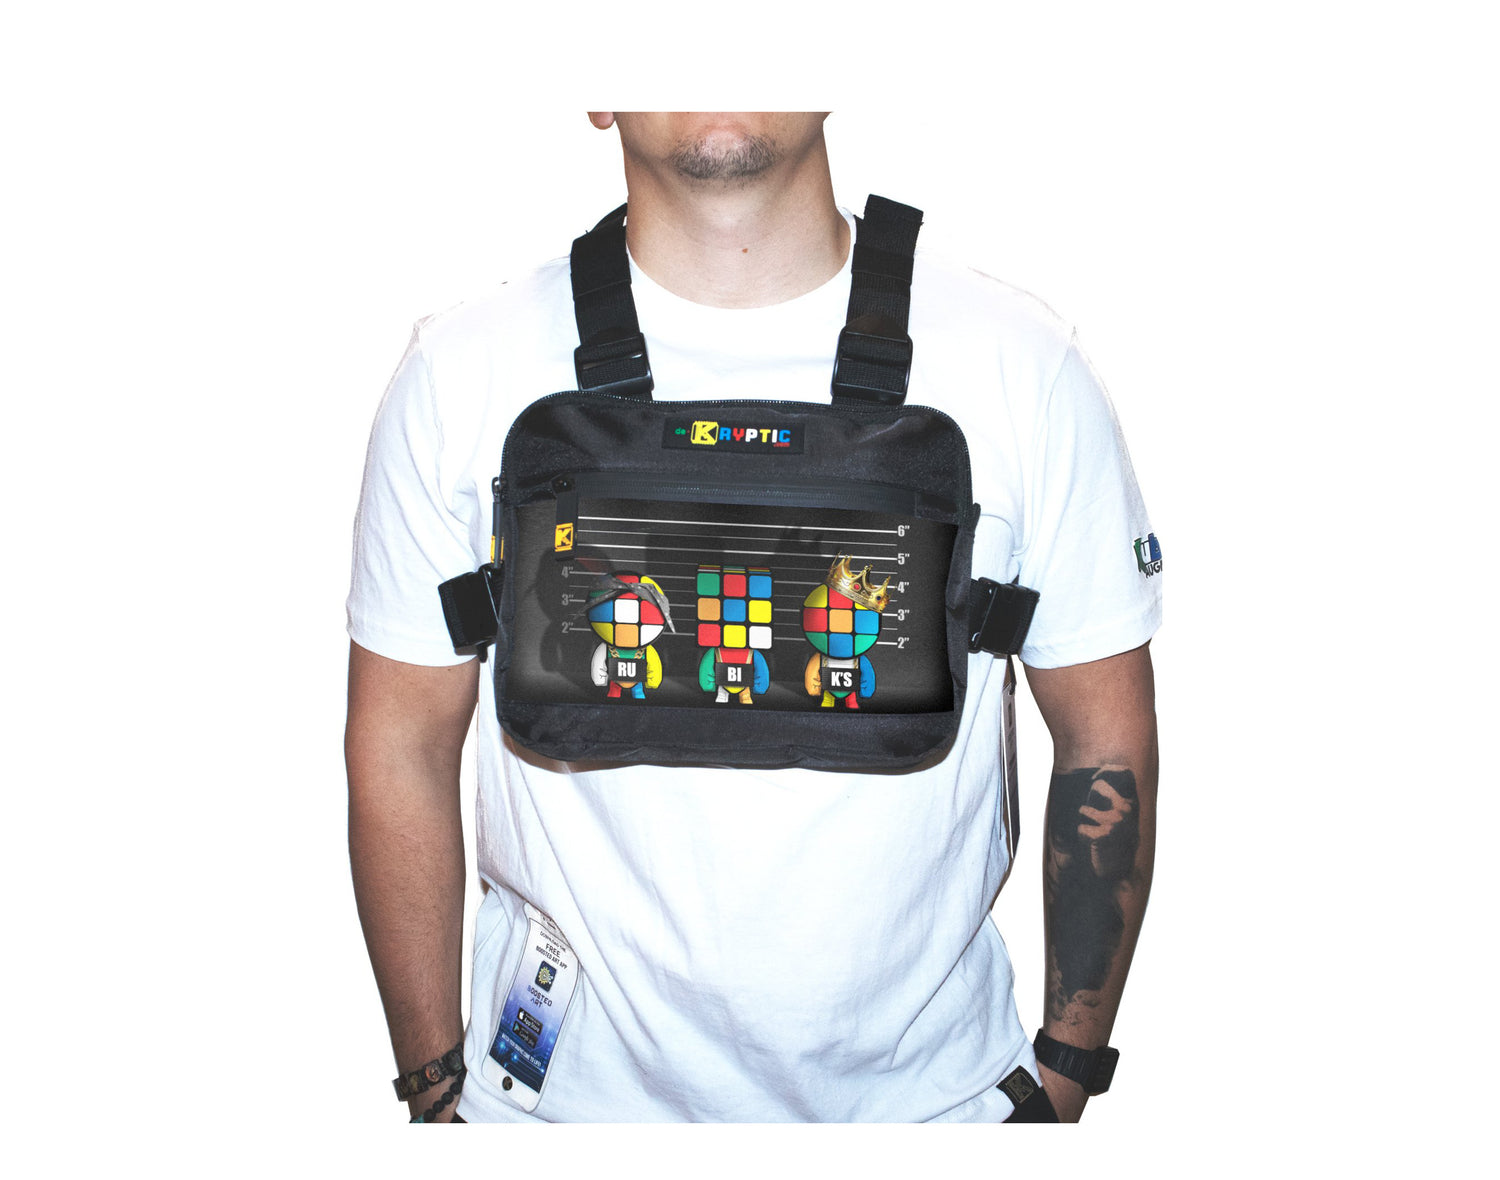 DeKryptic x Rubik's Unusual Suspects Augmented Reality Chest Rig Bag